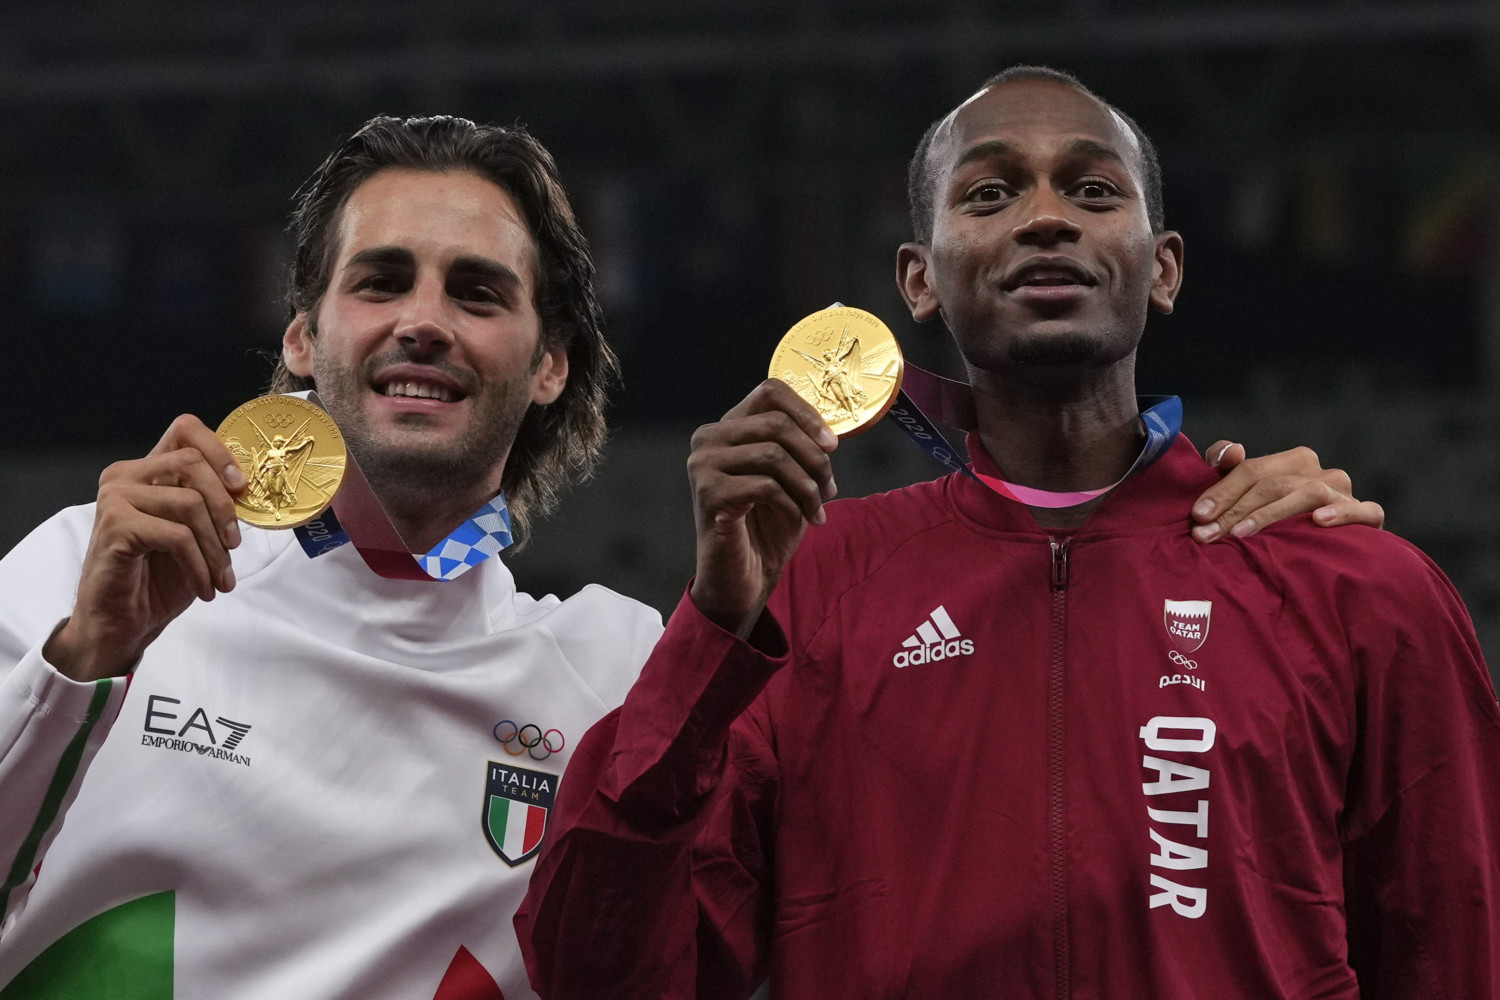 Joint gold medalists Mutaz Barshim and Gianmarco Tamberi